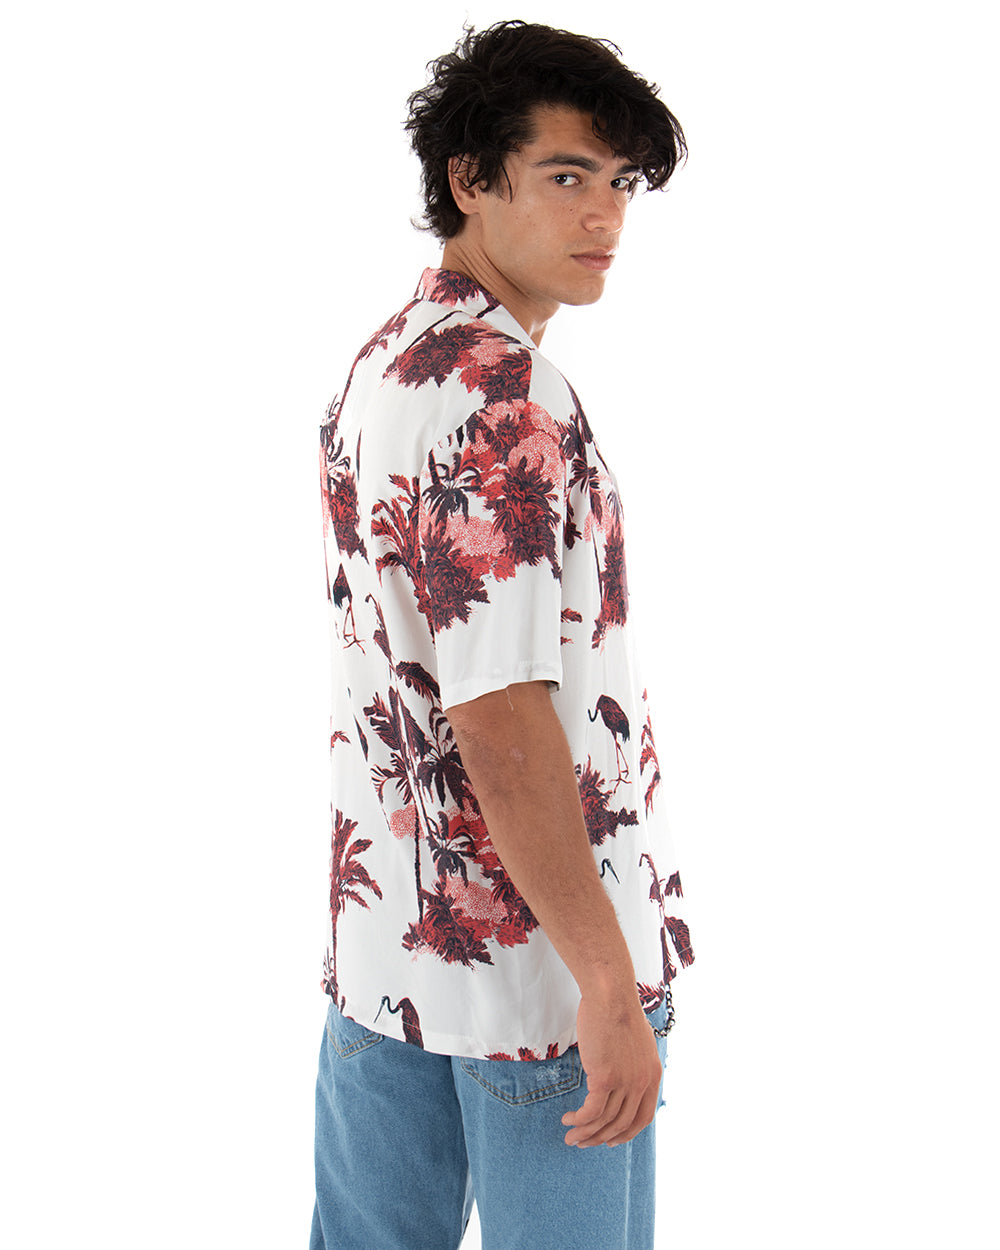 Men's Shirt Short Sleeve Floral Red White Casual Collar GIOSAL-CC1147A